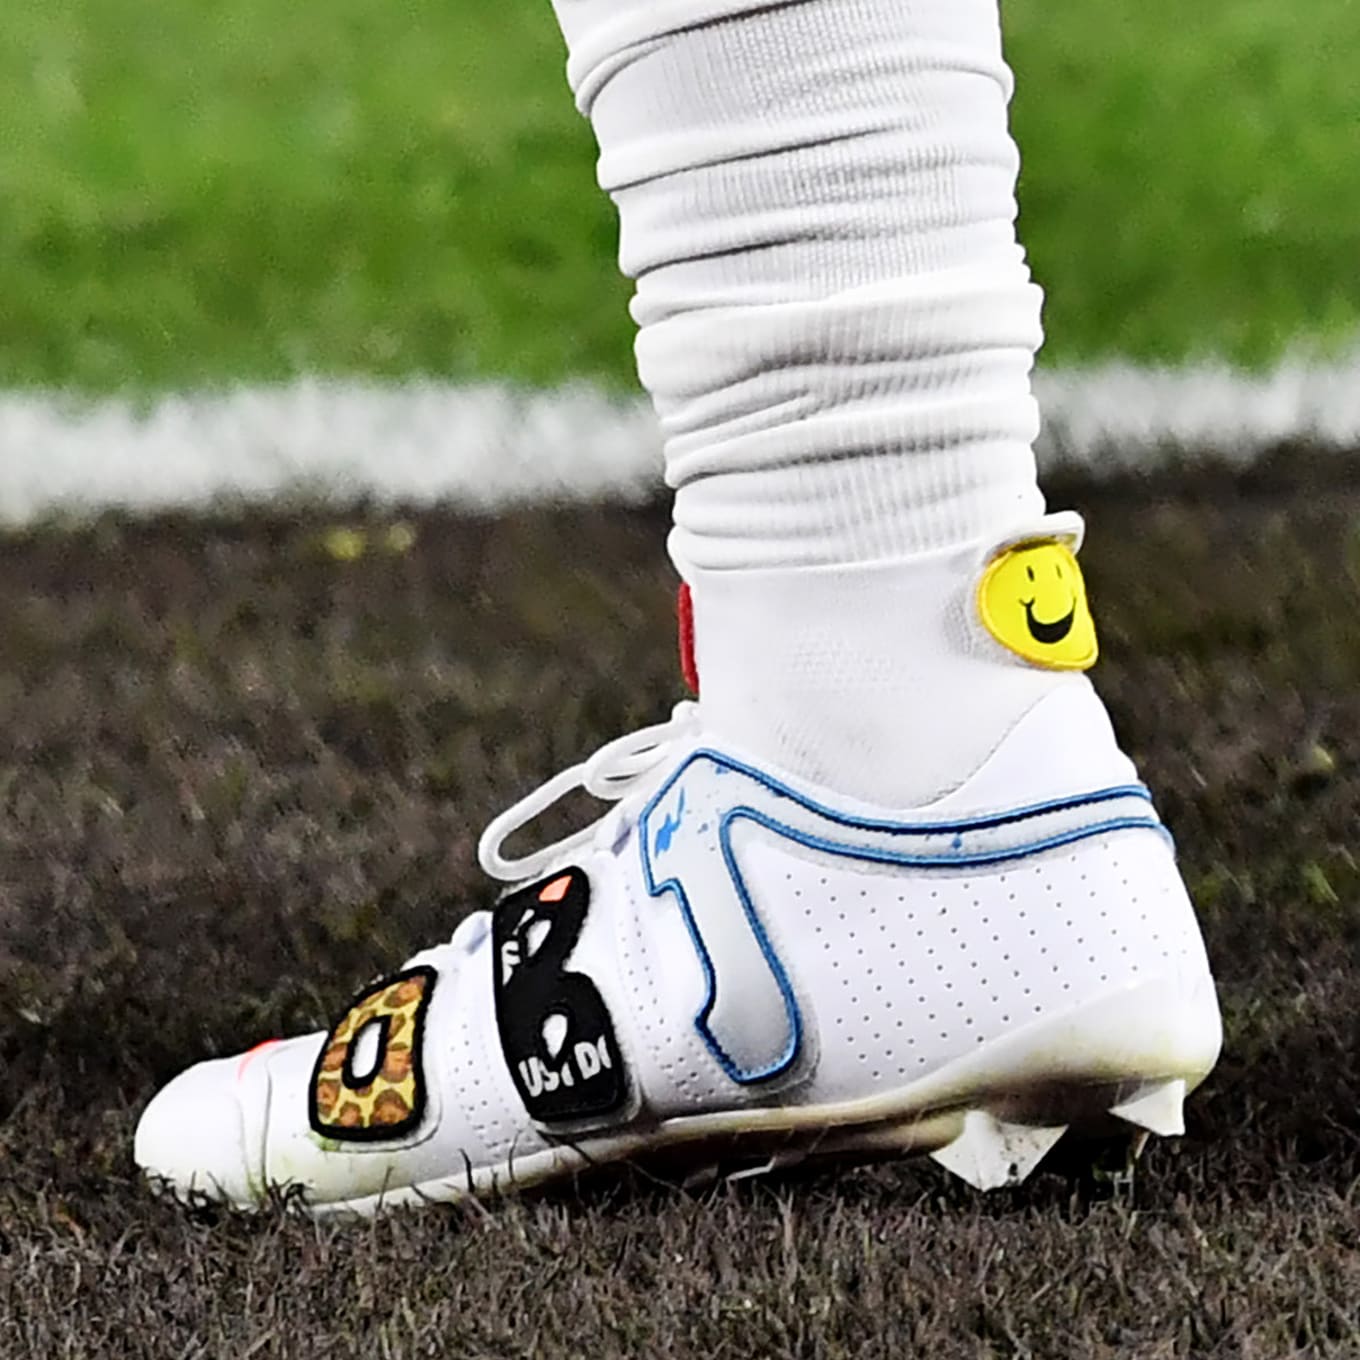 obj cleats for sale